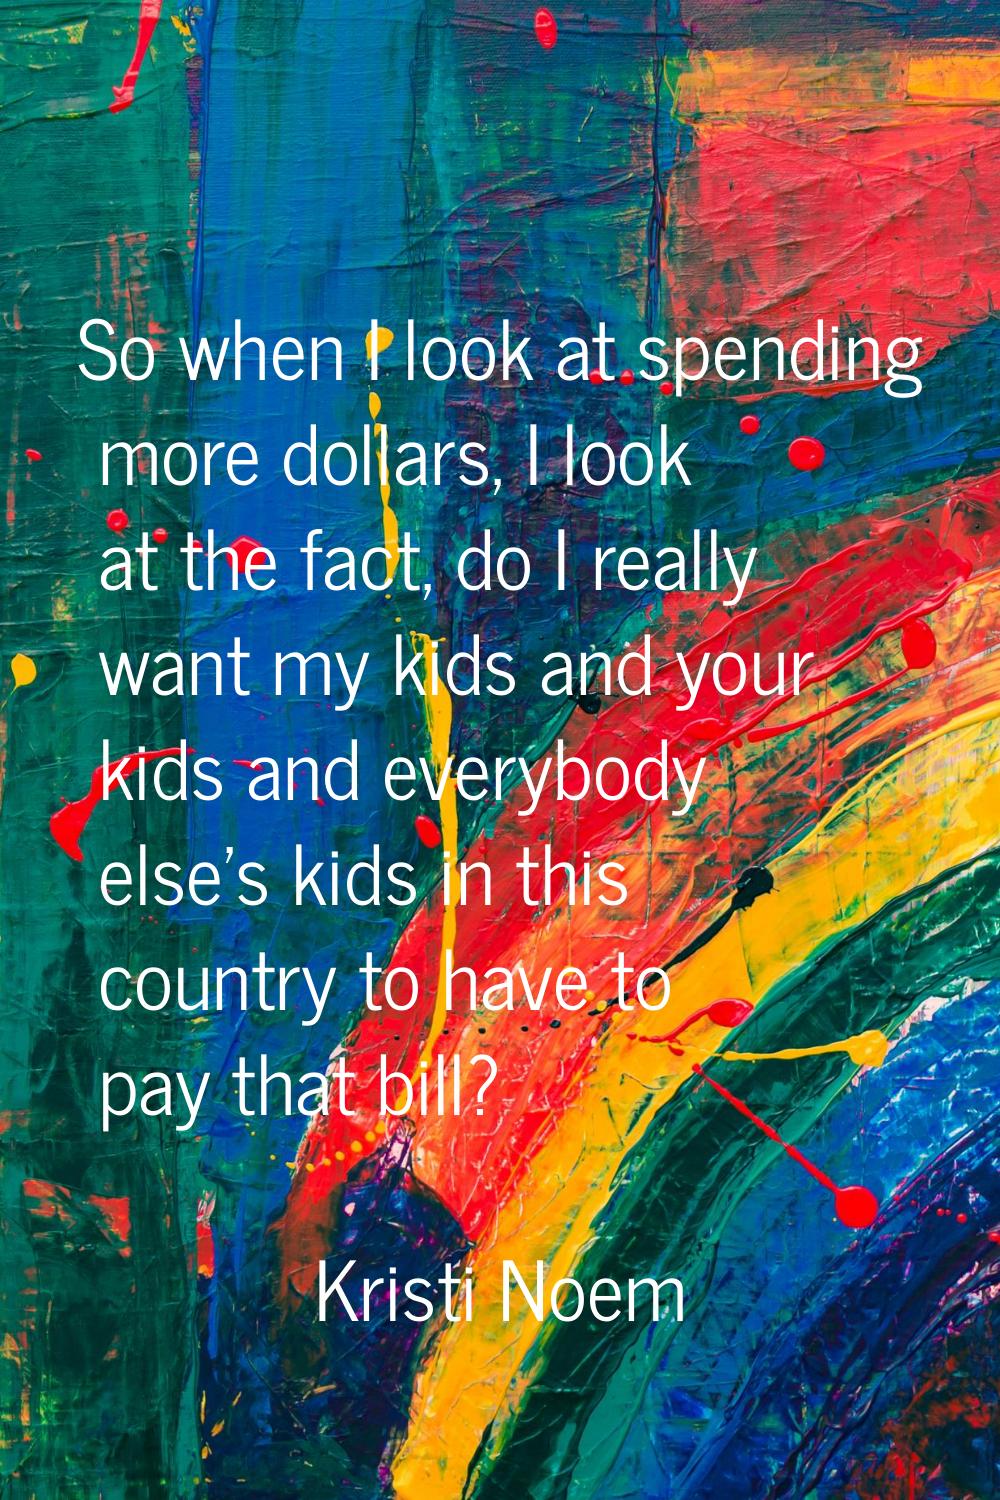 So when I look at spending more dollars, I look at the fact, do I really want my kids and your kids